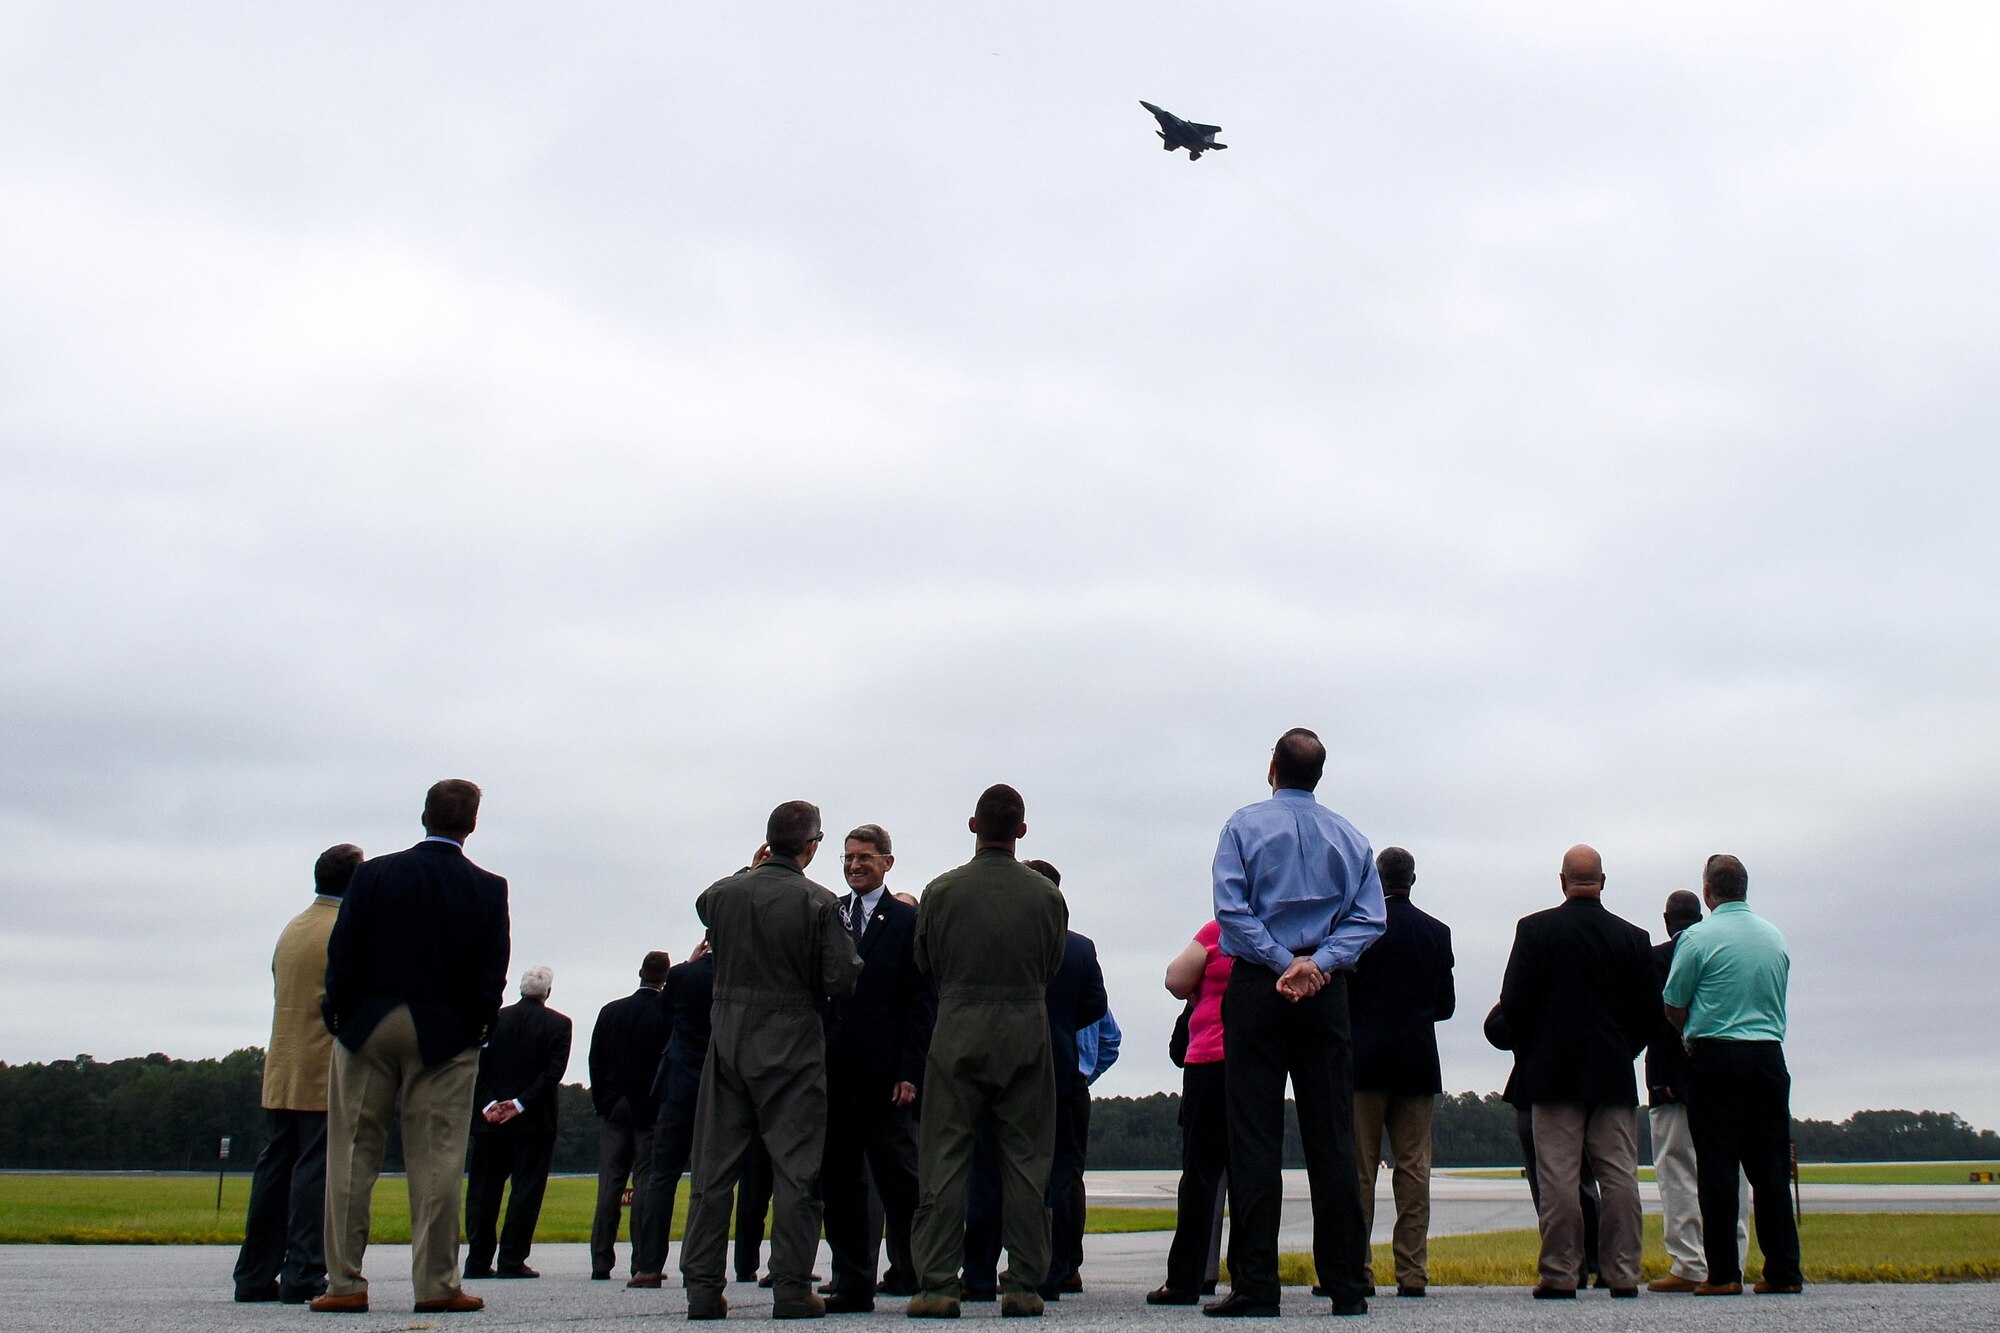 Distinguished visitors of the Joint Land Use Study Razor Talon tour watch an F-15E Strike Eagle from the 336th Fighter Squadron take off, Sept. 16, 2016, at Seymour Johnson Air Force Base, North Carolina. The aircraft participated in Razor Talon, which is a monthly exercise that allows service members unique opportunities to combine land, air and sea forces from all service branches in a realistic training environment. (U.S. Air Force photo by Airman Shawna L. Keyes)